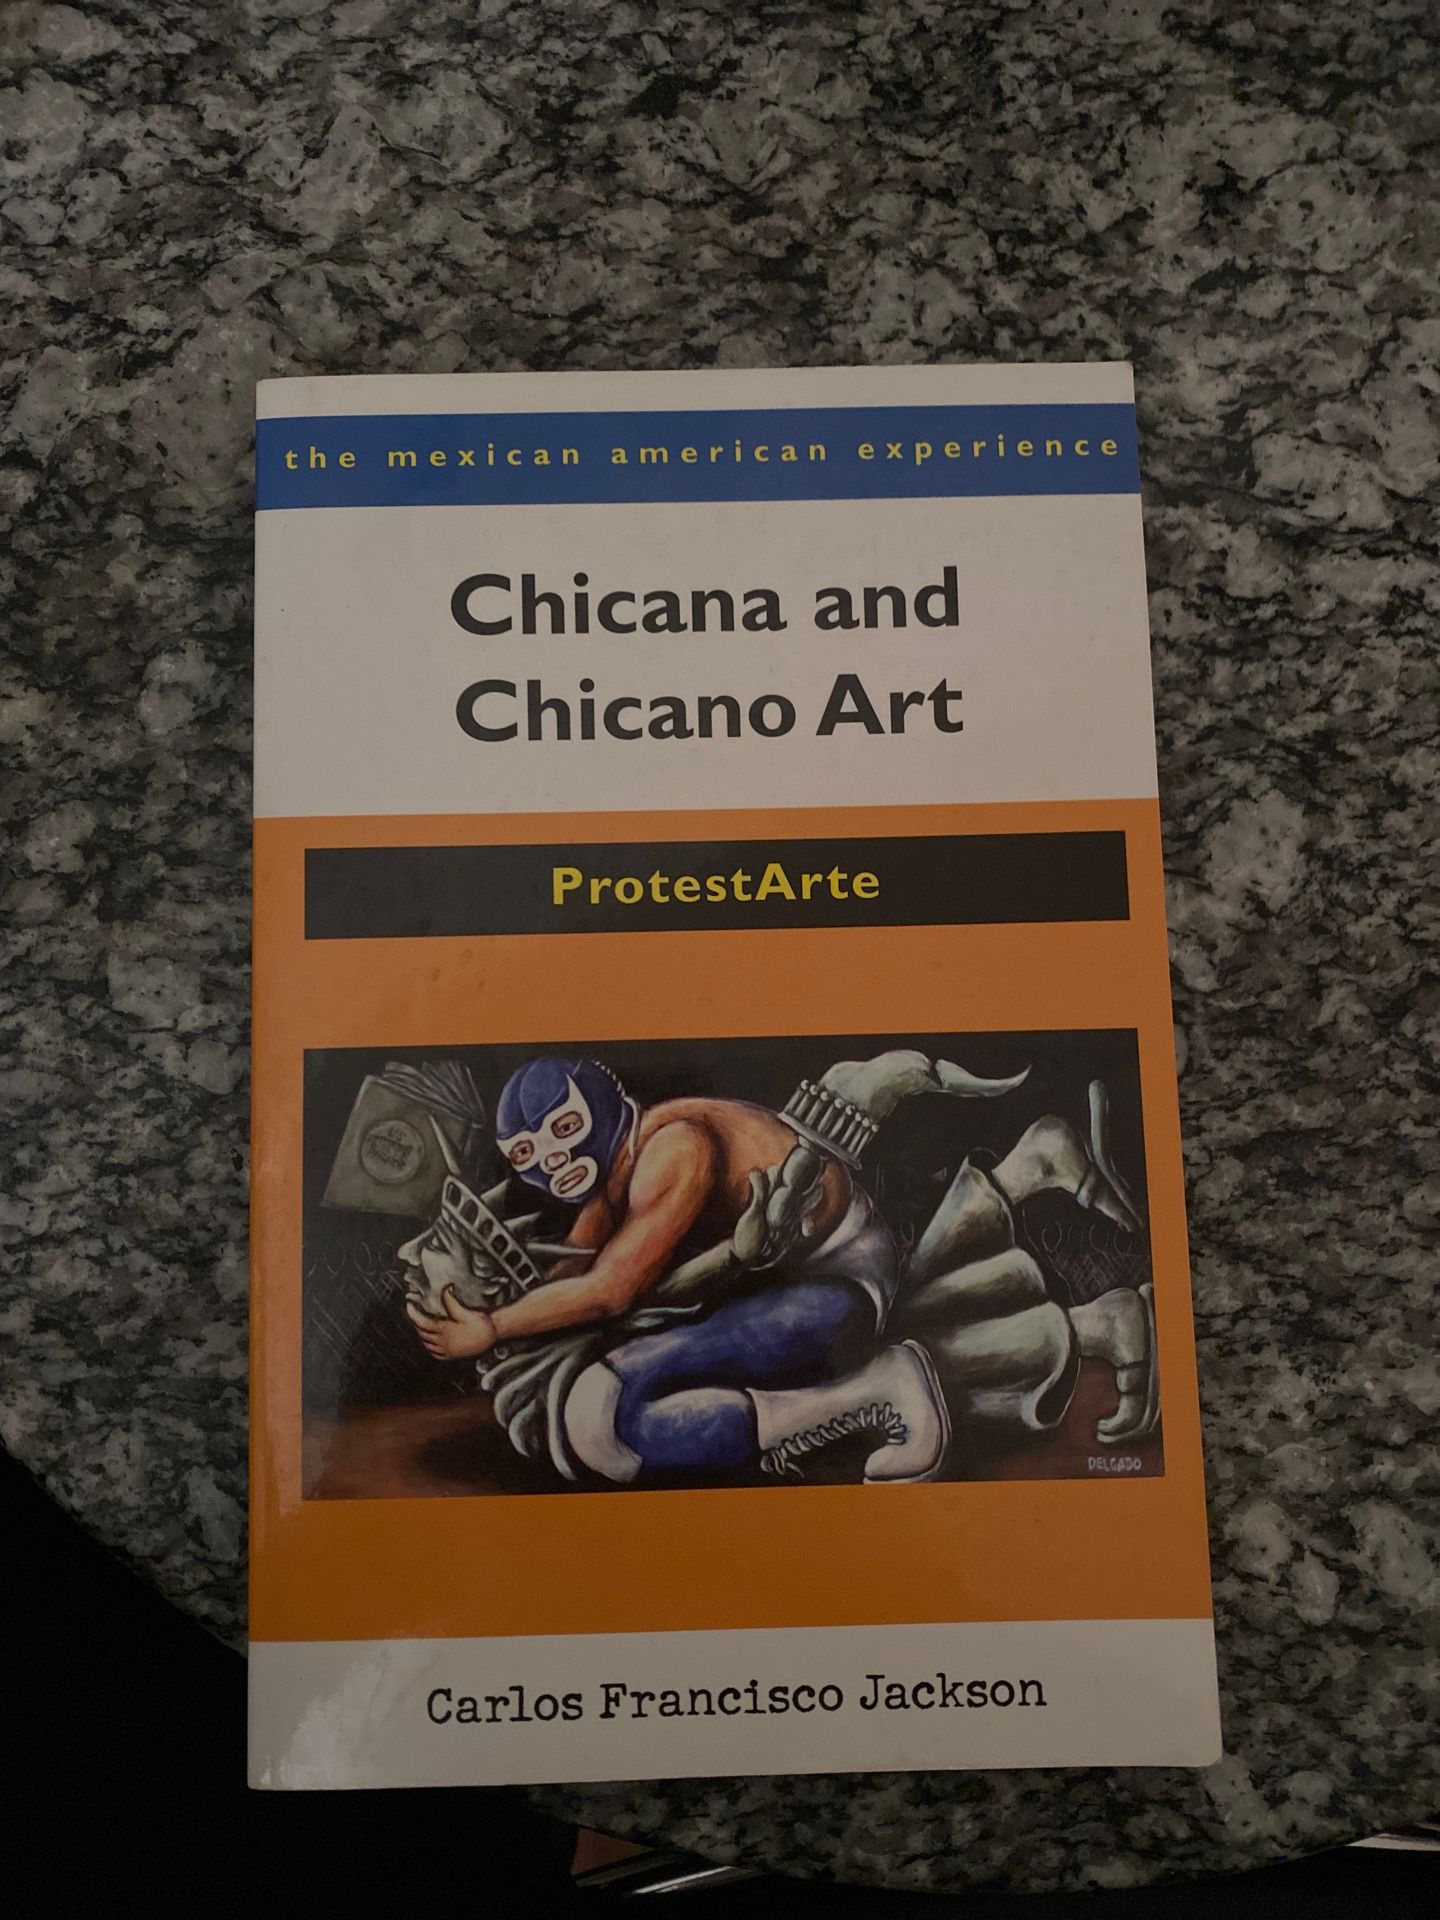 Chicana and Chicano Art book by Carlos Francisco Jackson